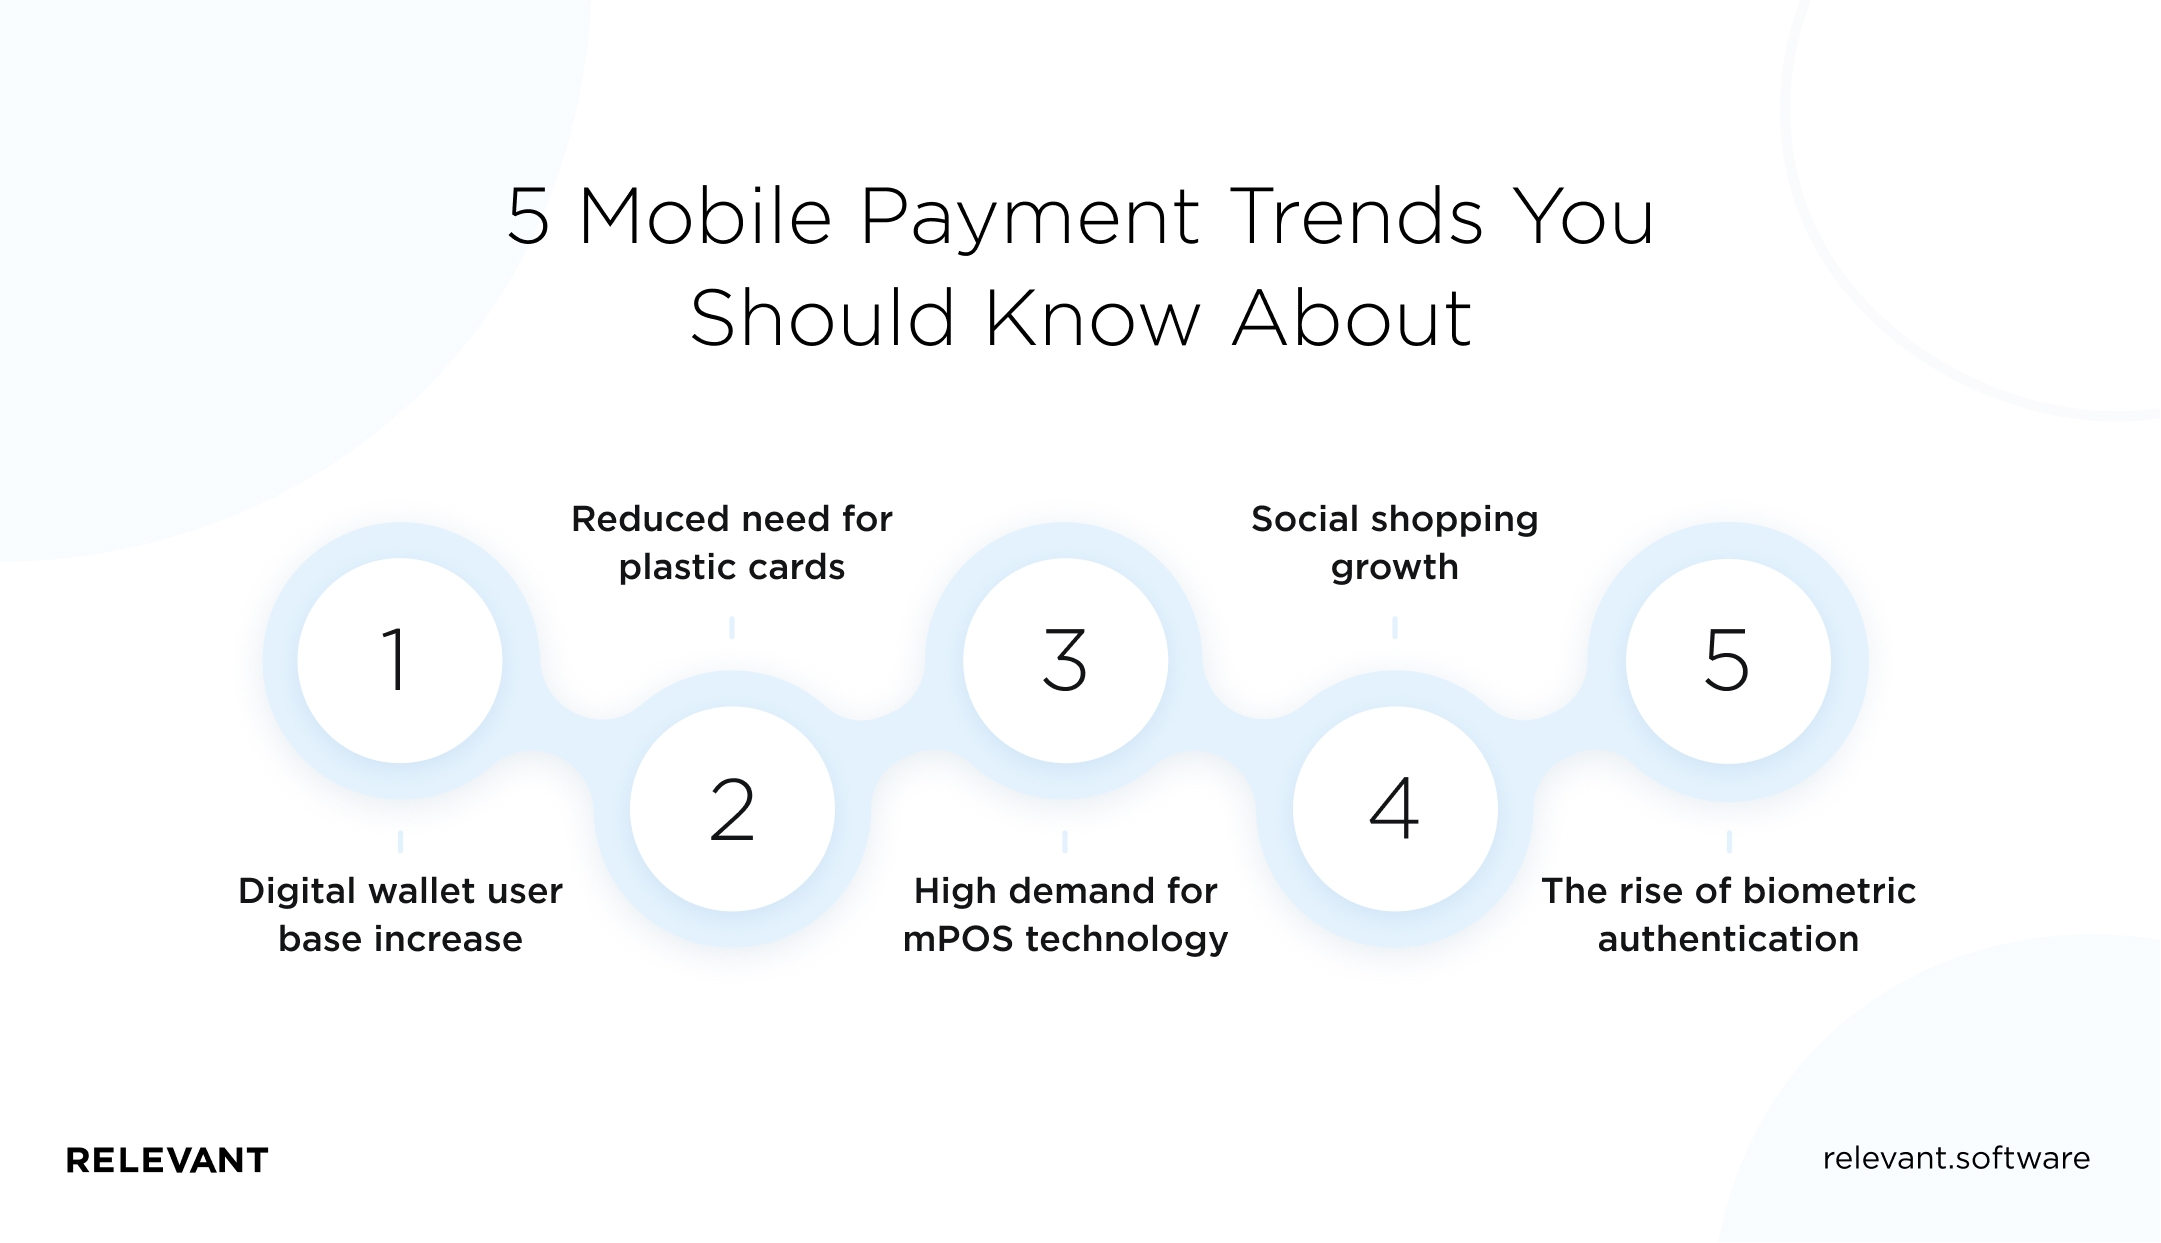 5 mobile payment trends you should know about